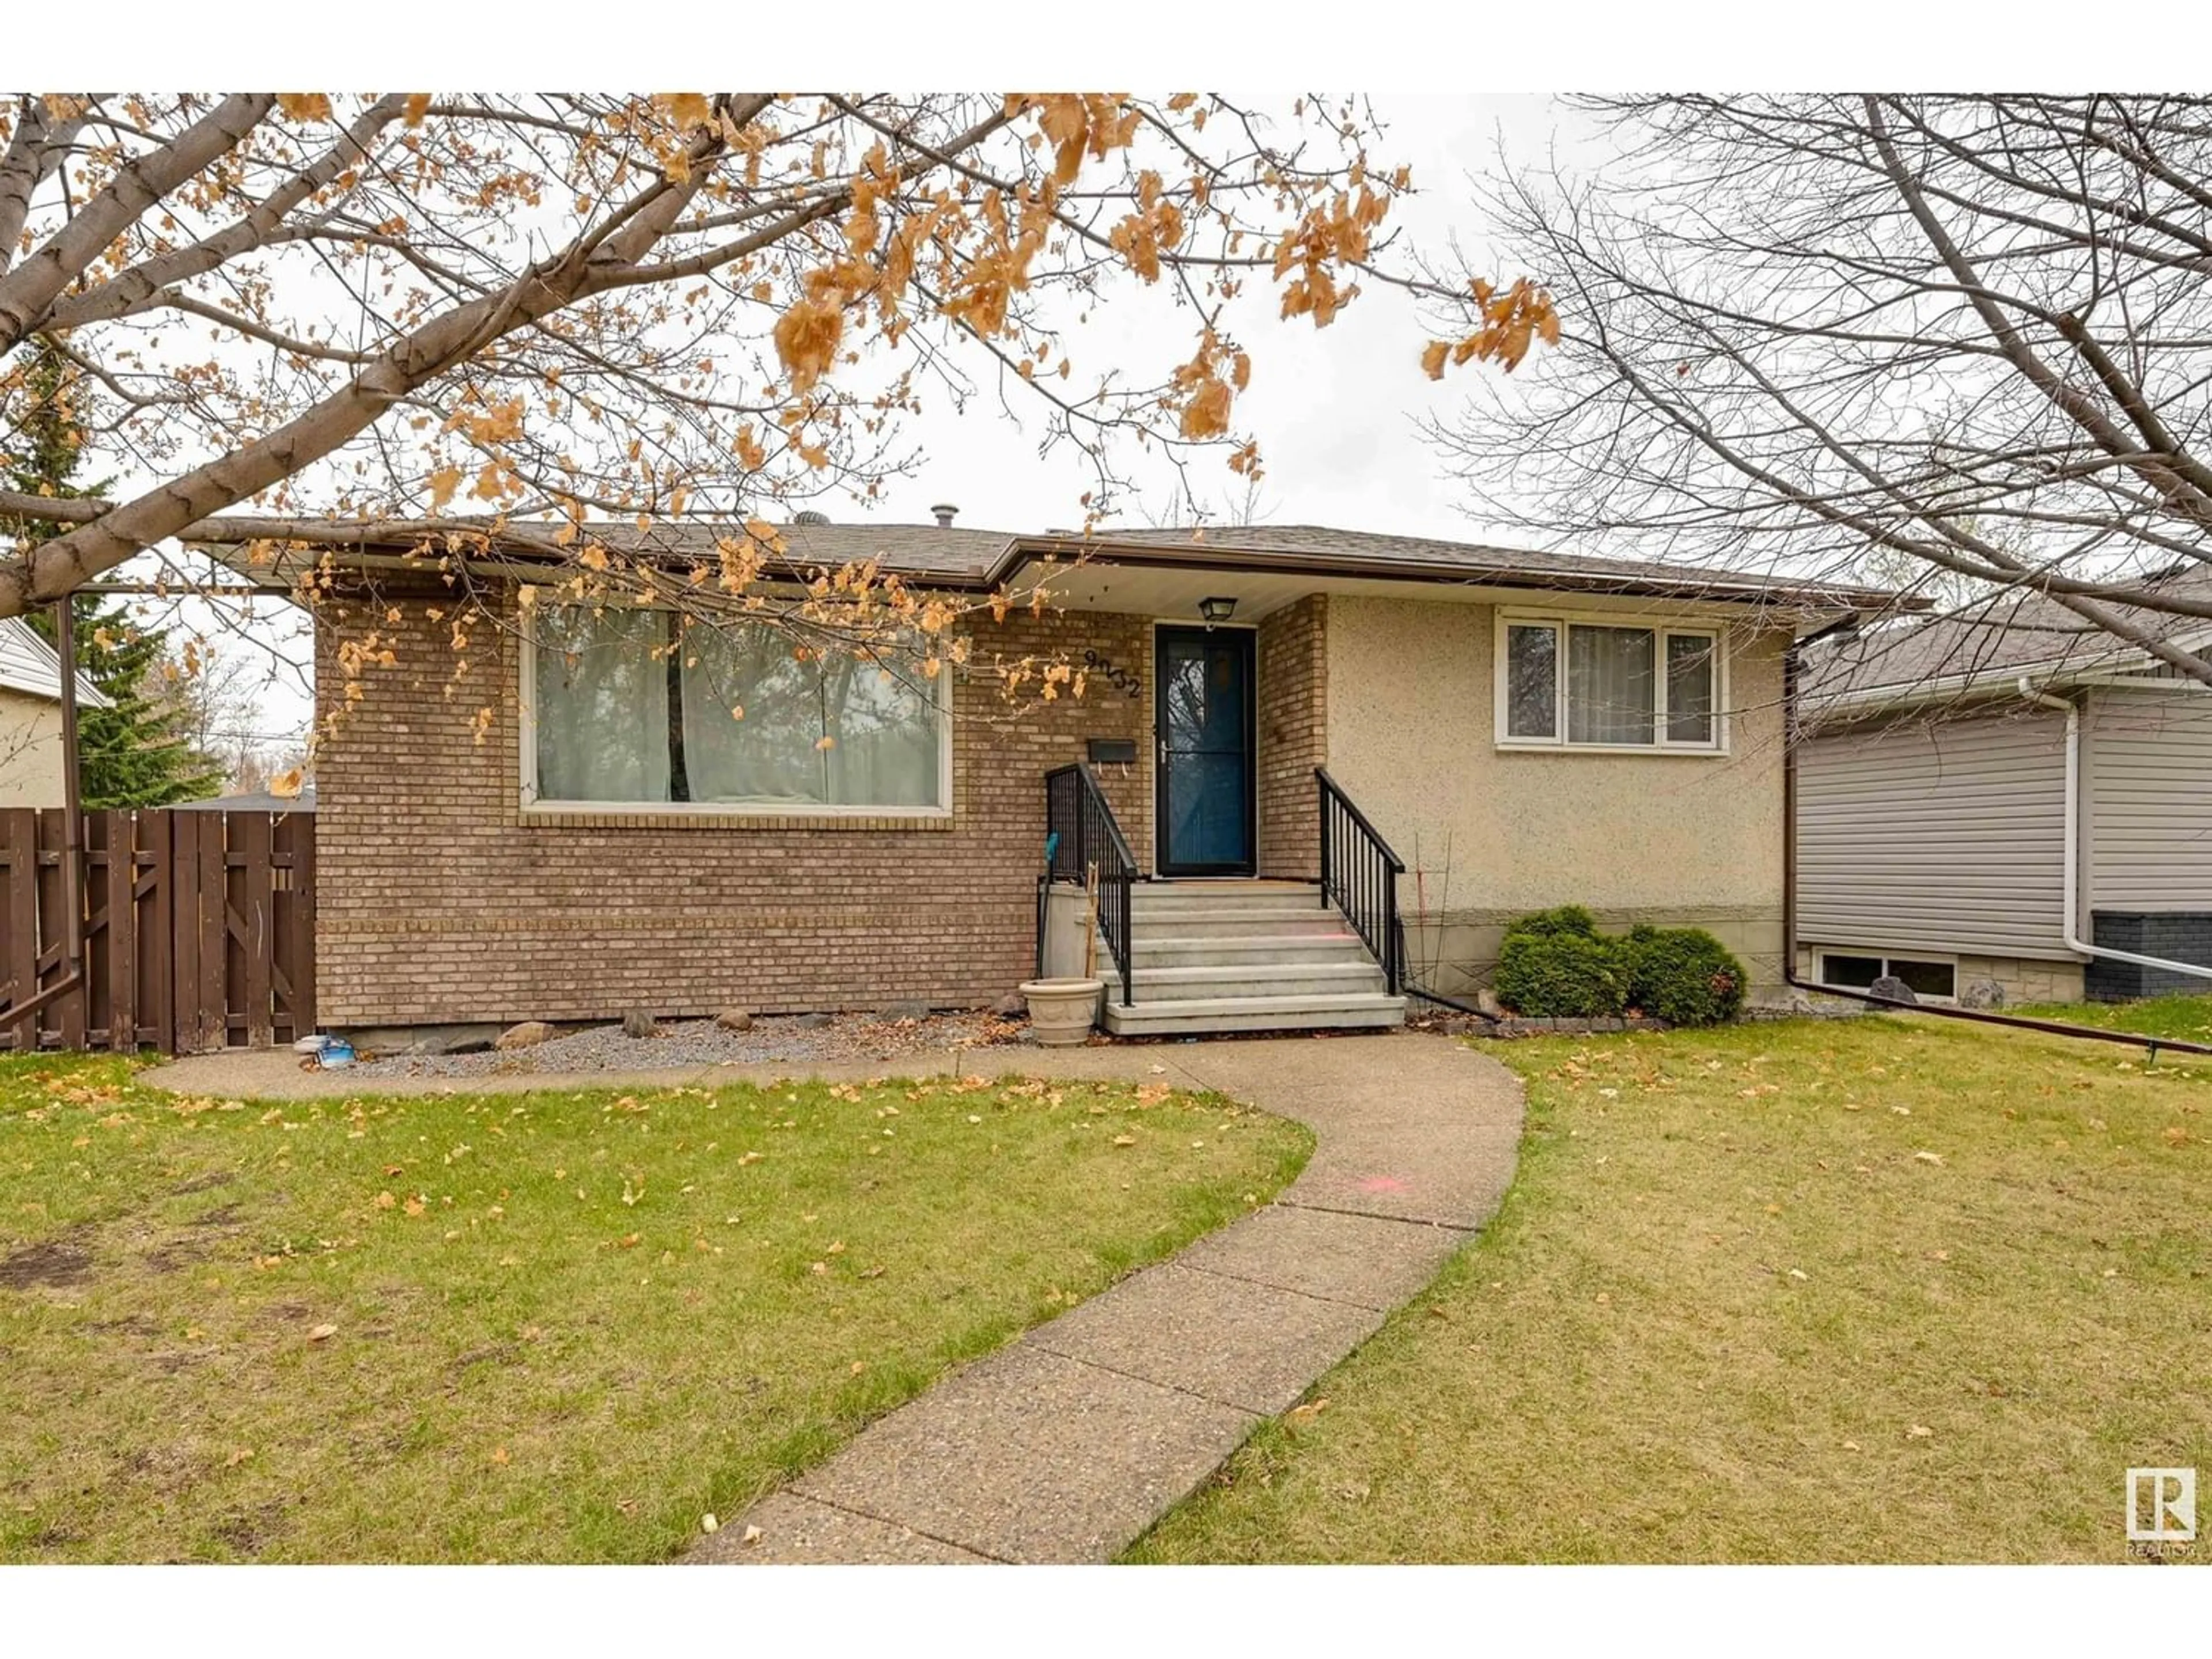 Frontside or backside of a home for 9232 79 ST NW, Edmonton Alberta T6C2R5